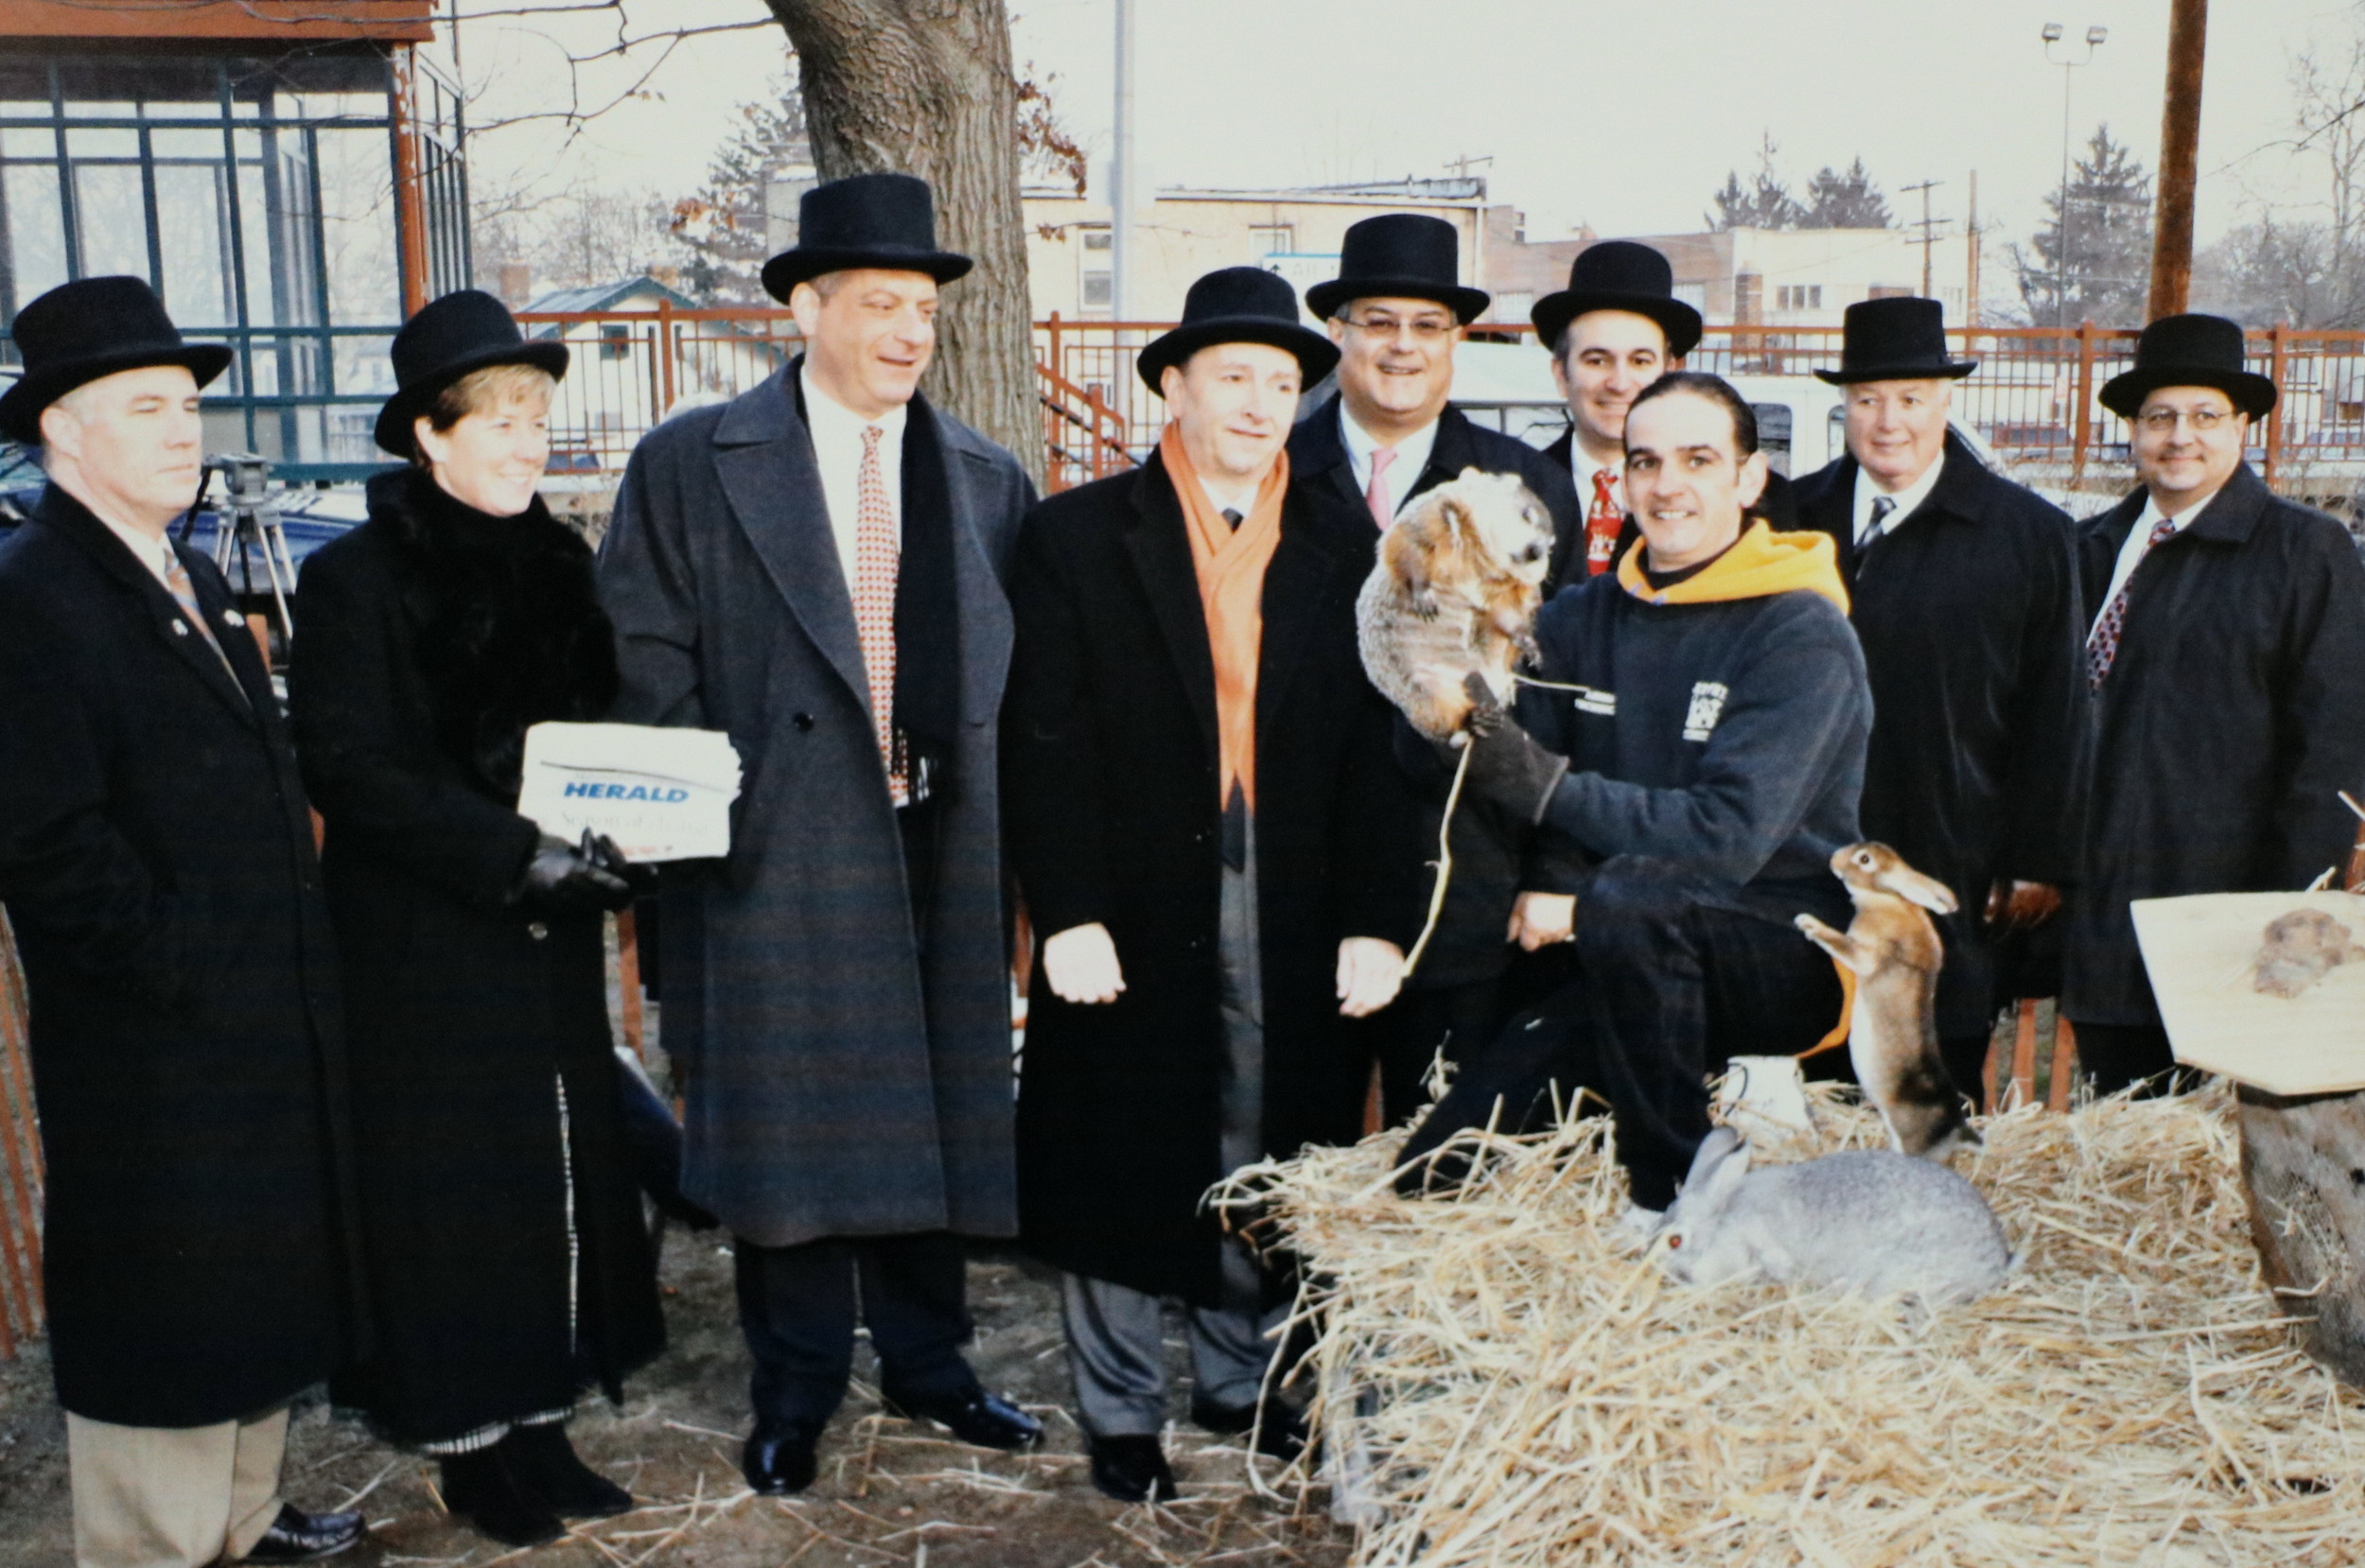 Groundhog Day 2004 in Malverne. From left: past village Trustee William Malone; current Mayor Patti Ann McDonald; Herald Publisher Cliff Richner; past Mayor Anthony Panzarella; current Town Supervisor Anthony Santino; past Deputy Mayor James Callahan; Mel handler  Andre Ricaud; past Village Justice James W. Dougherty; and past Lynbrook trustee David Penzo.